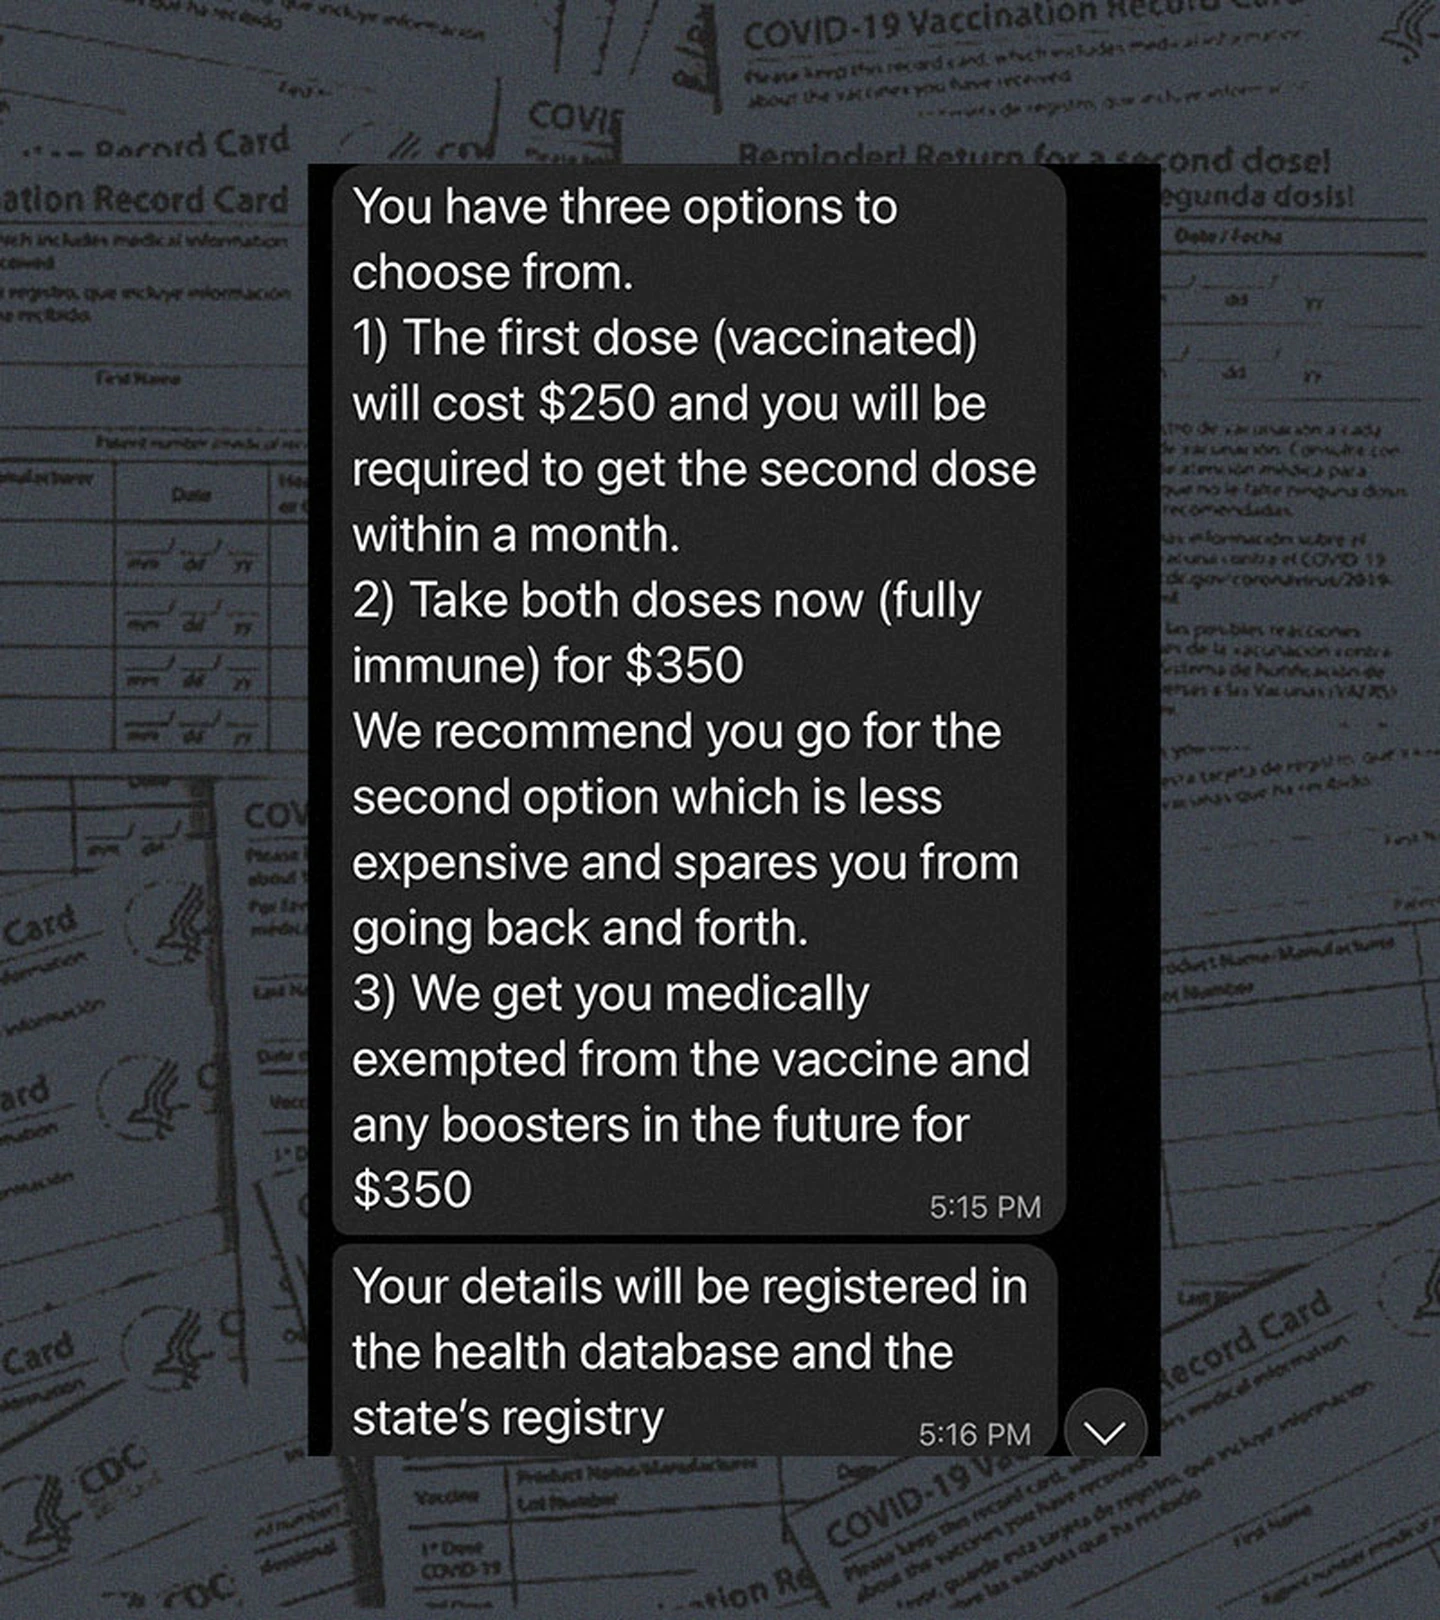 A Telegram user offers options for a fake vaccine card, with prices ranging from $250 to $350. They also claim to be able to register the information in a state registry. (Source: Telegram)